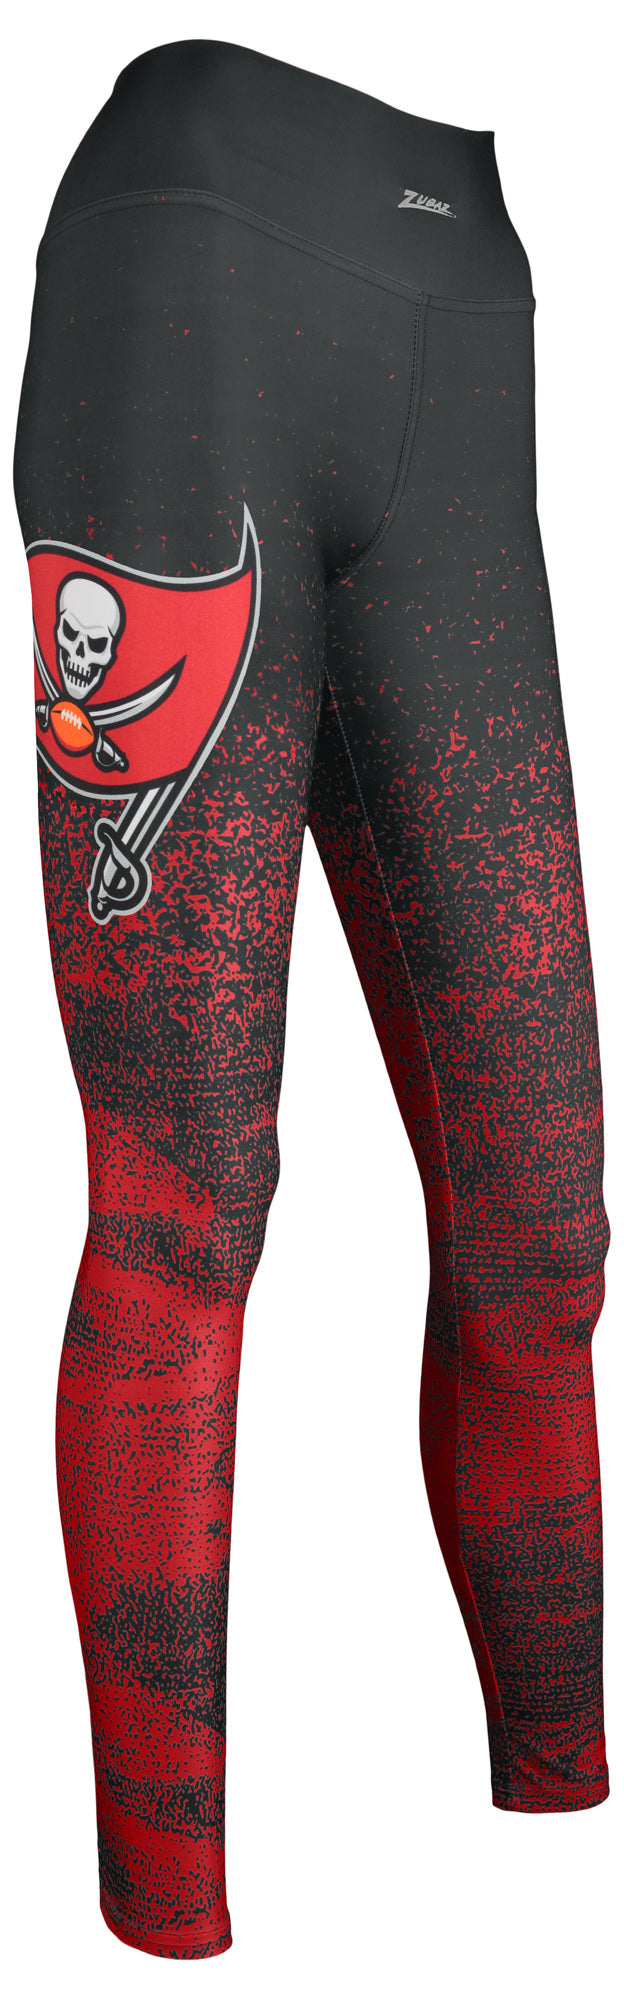 Certo By Northwest NFL Women's Tampa Bay Buccaneers Assembly Leggings,  Black